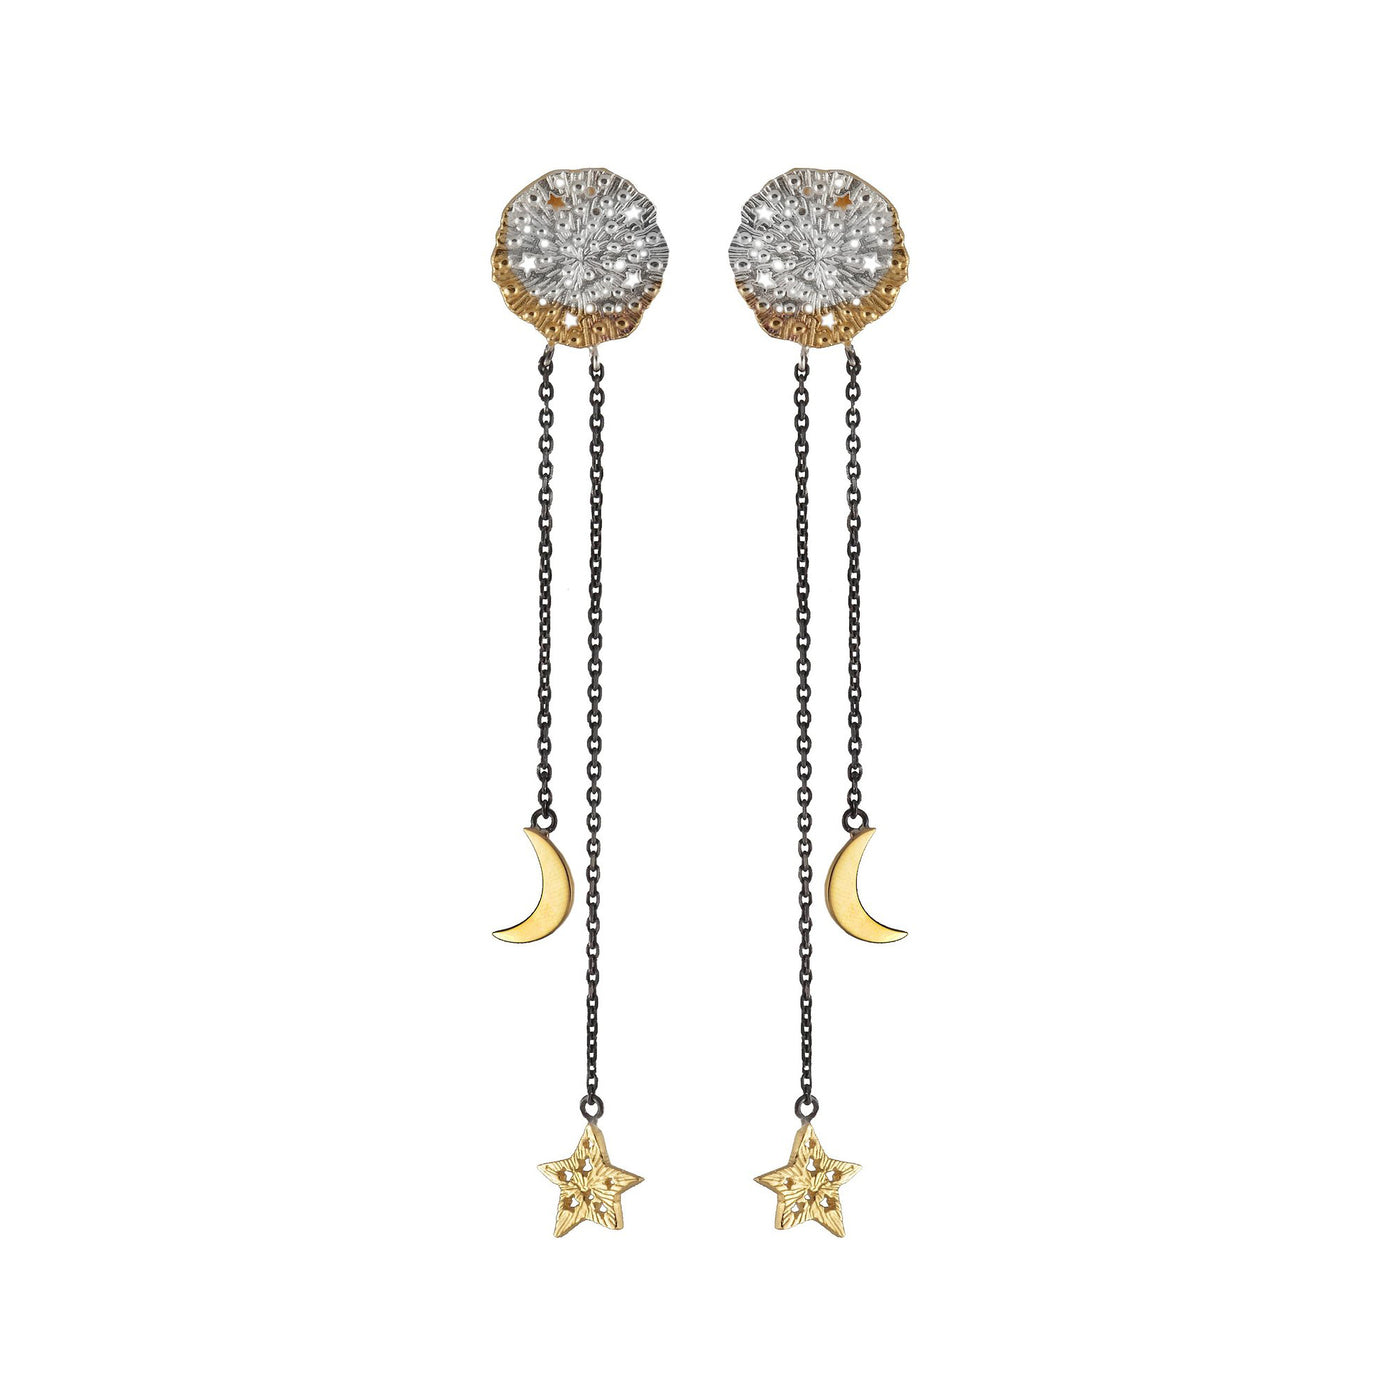 Cosmic medallion with Star and Moon on the chain earrings. Silver, partly gold-plated